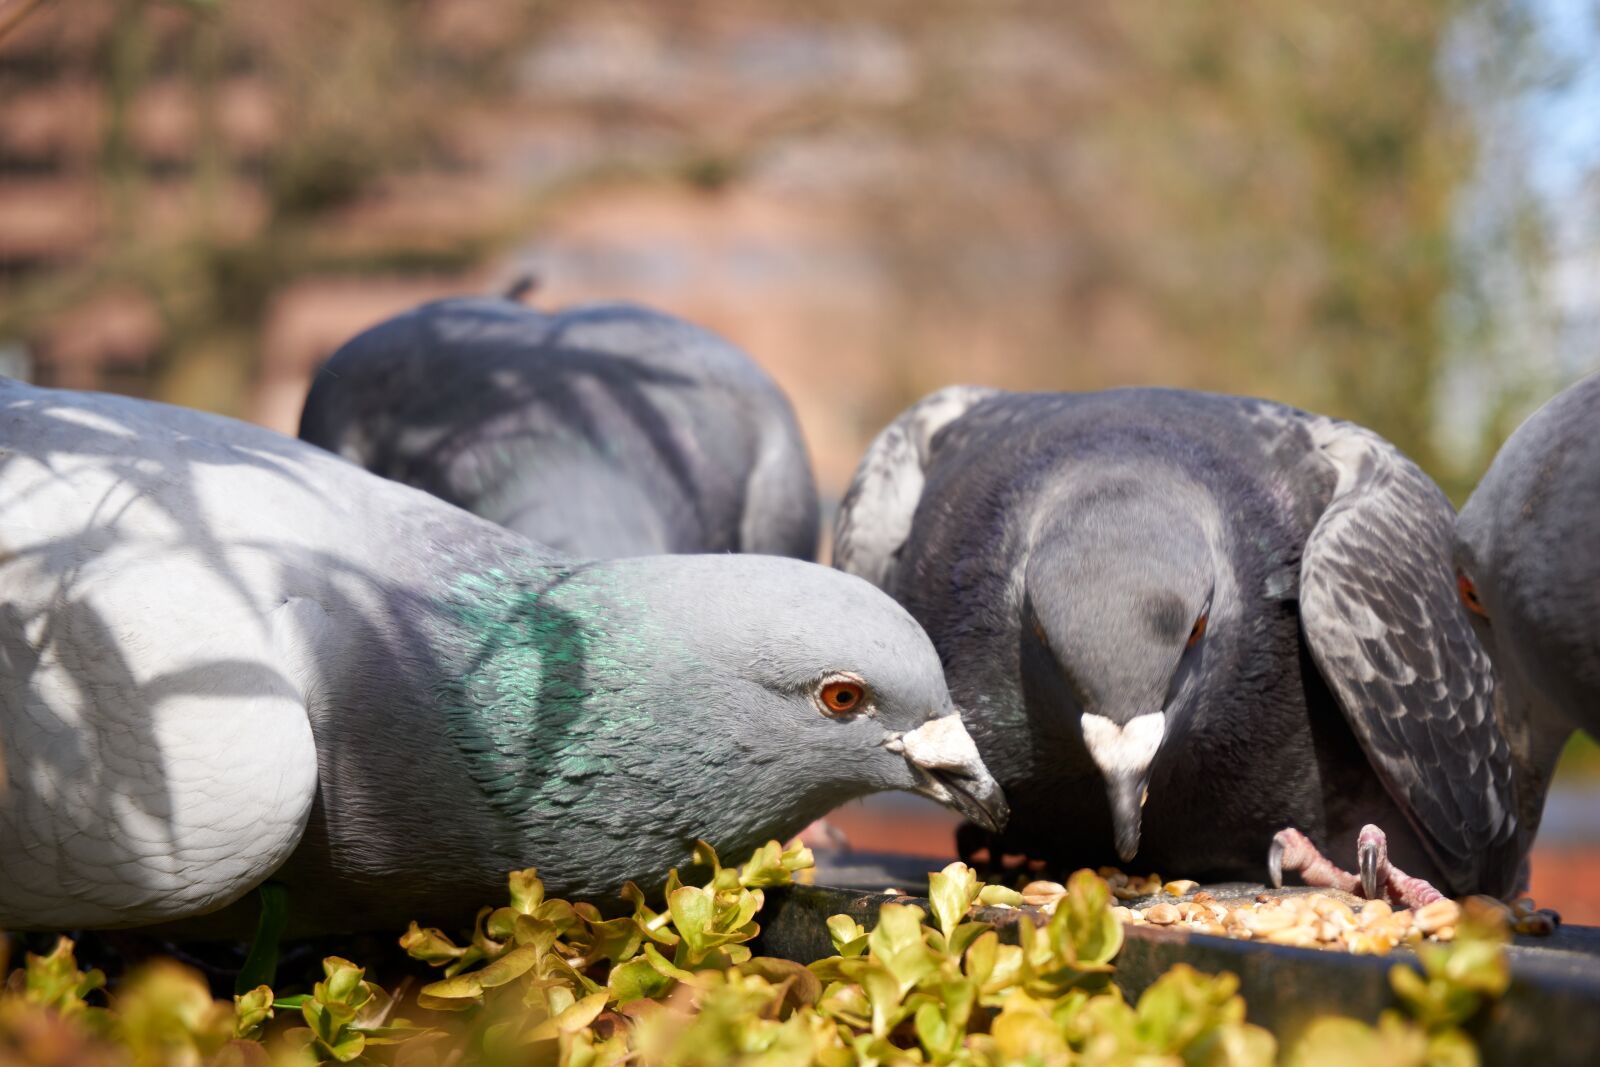 Sony E PZ 16-50 mm F3.5-5.6 OSS (SELP1650) sample photo. Pigeons, eating, seeds photography